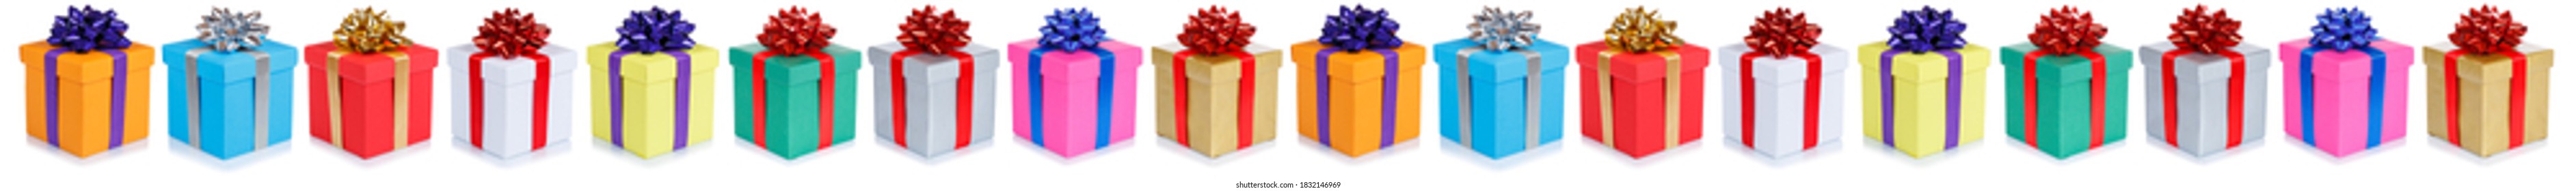 Christmas gifts birthday presents gift present banner isolated on a white background